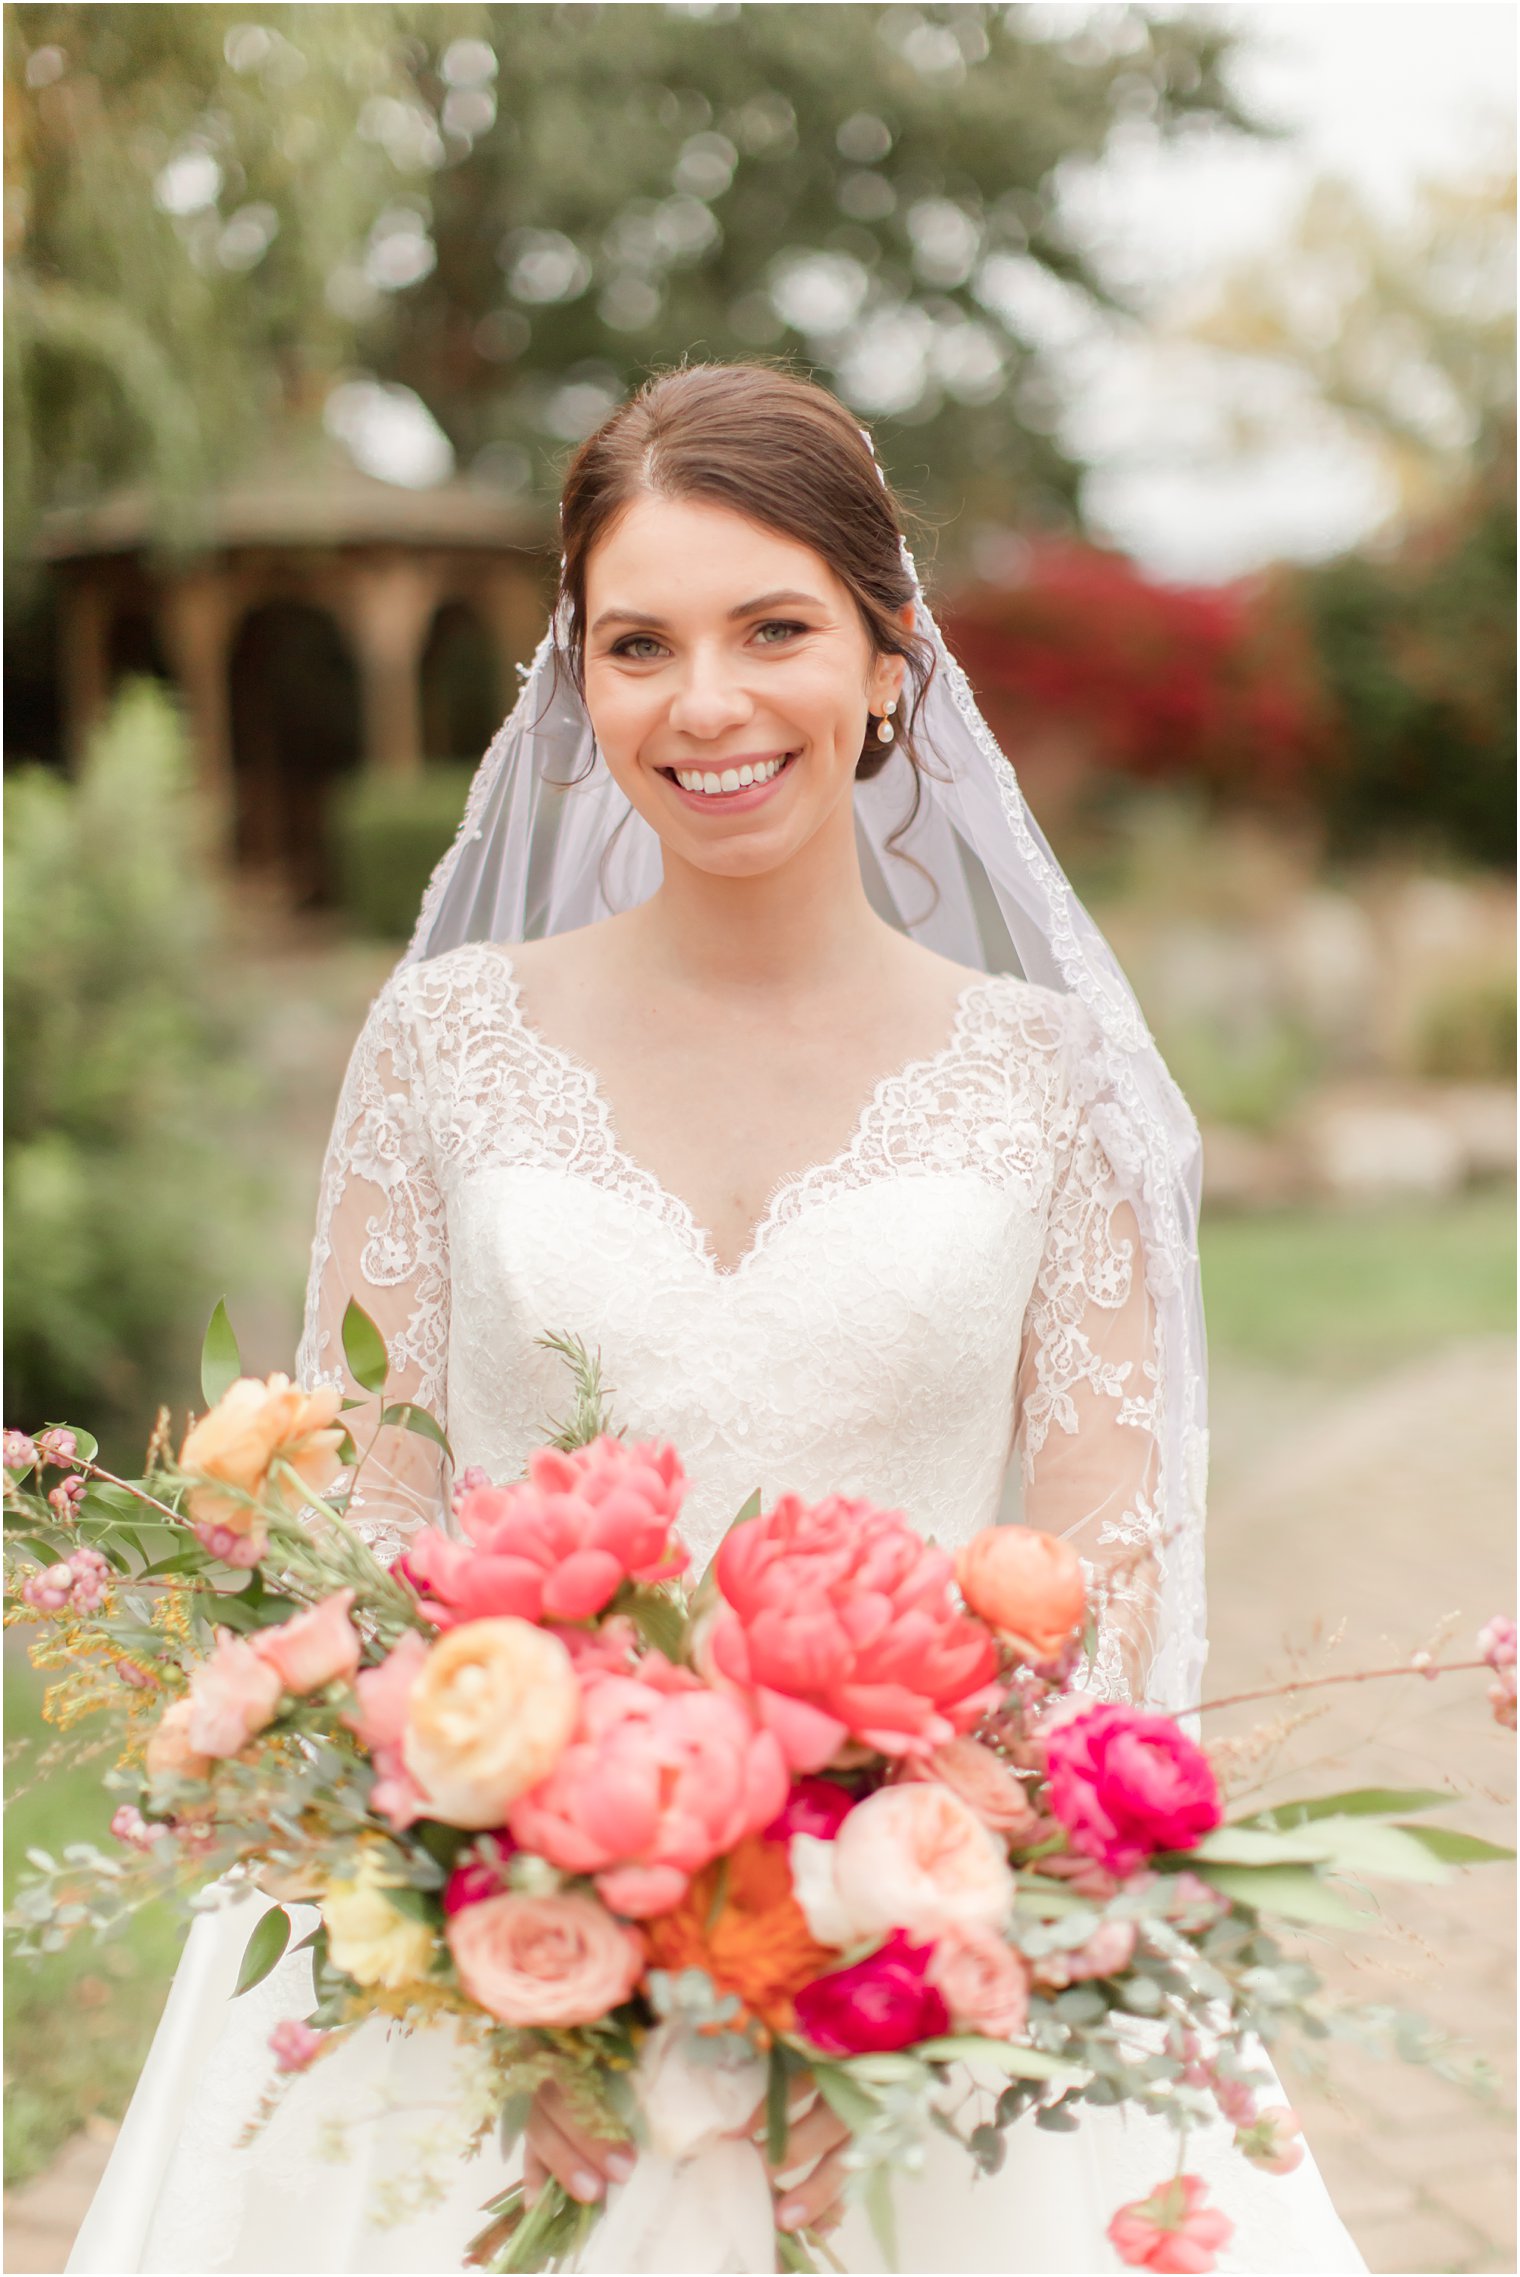 New Jersey bridal portrait with bouquet of peonies